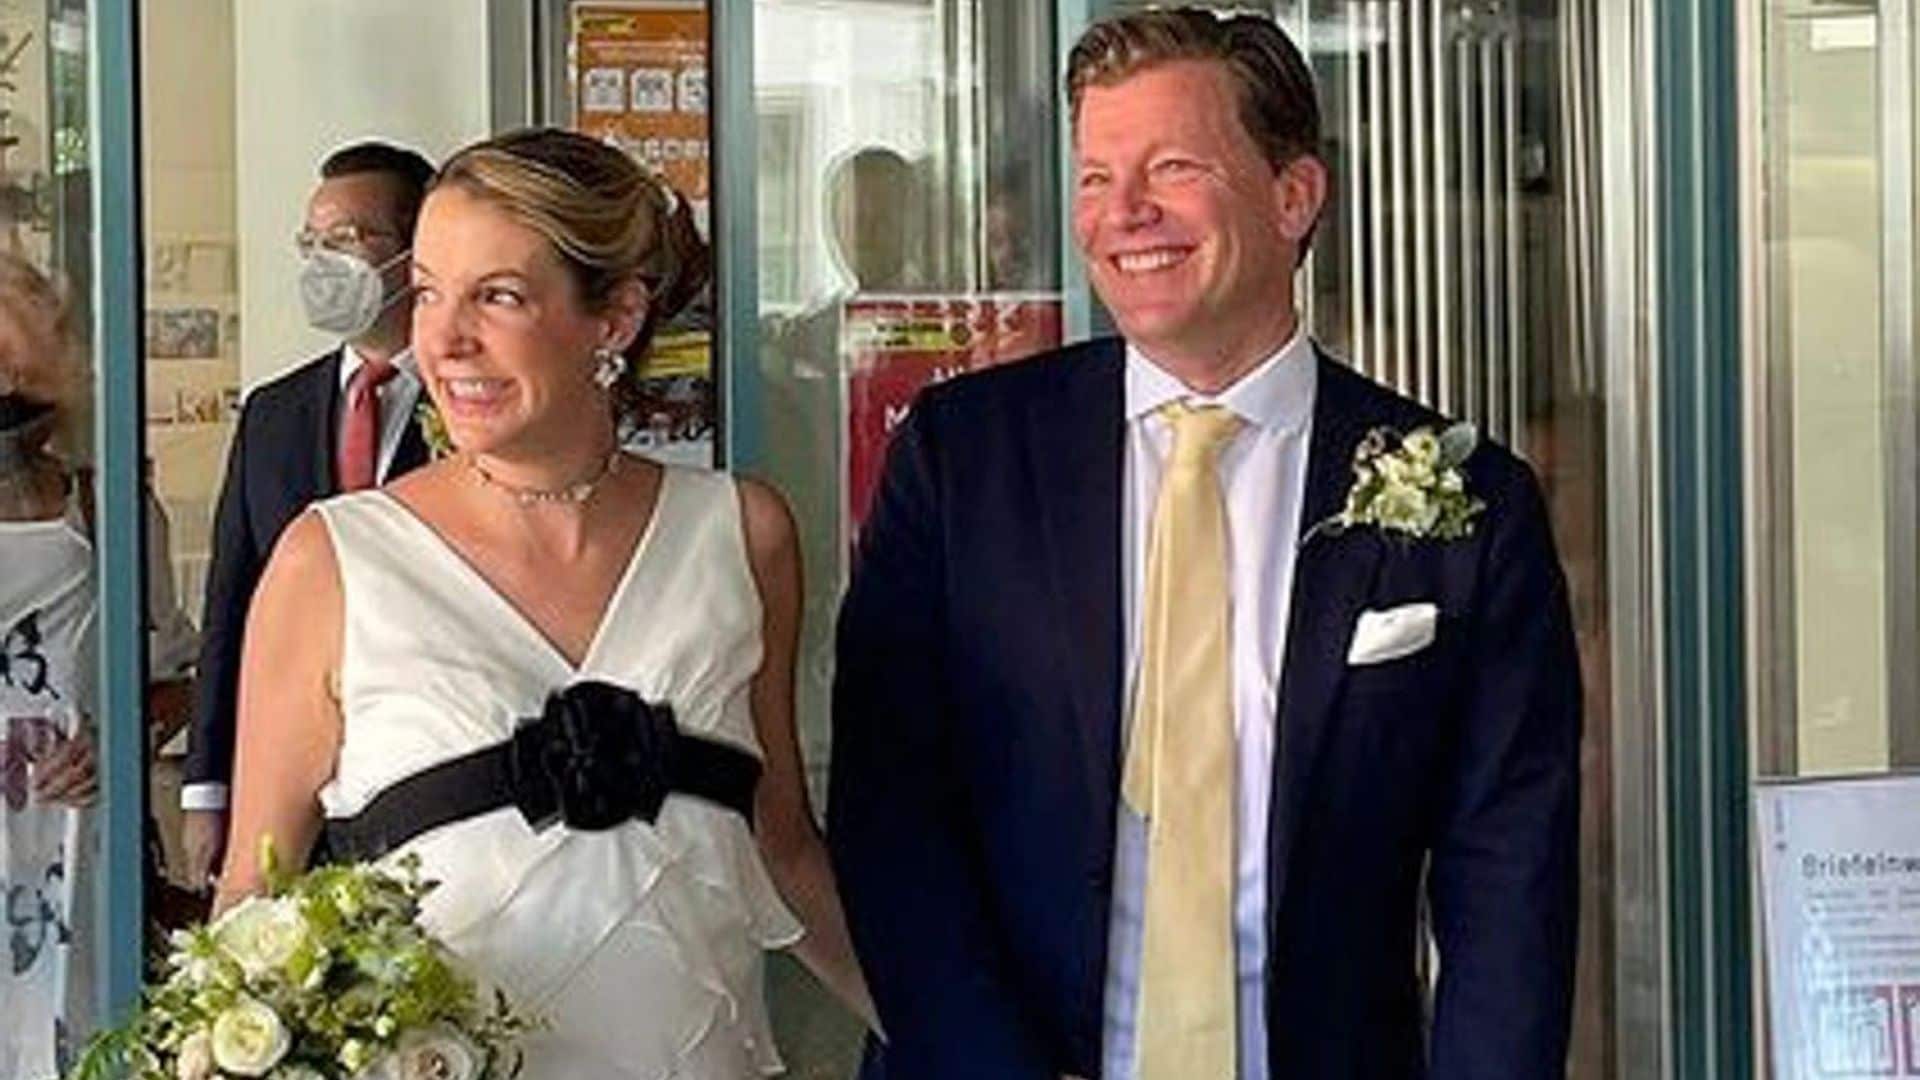 Former Princess of Luxembourg marries fiance ahead of baby's arrival